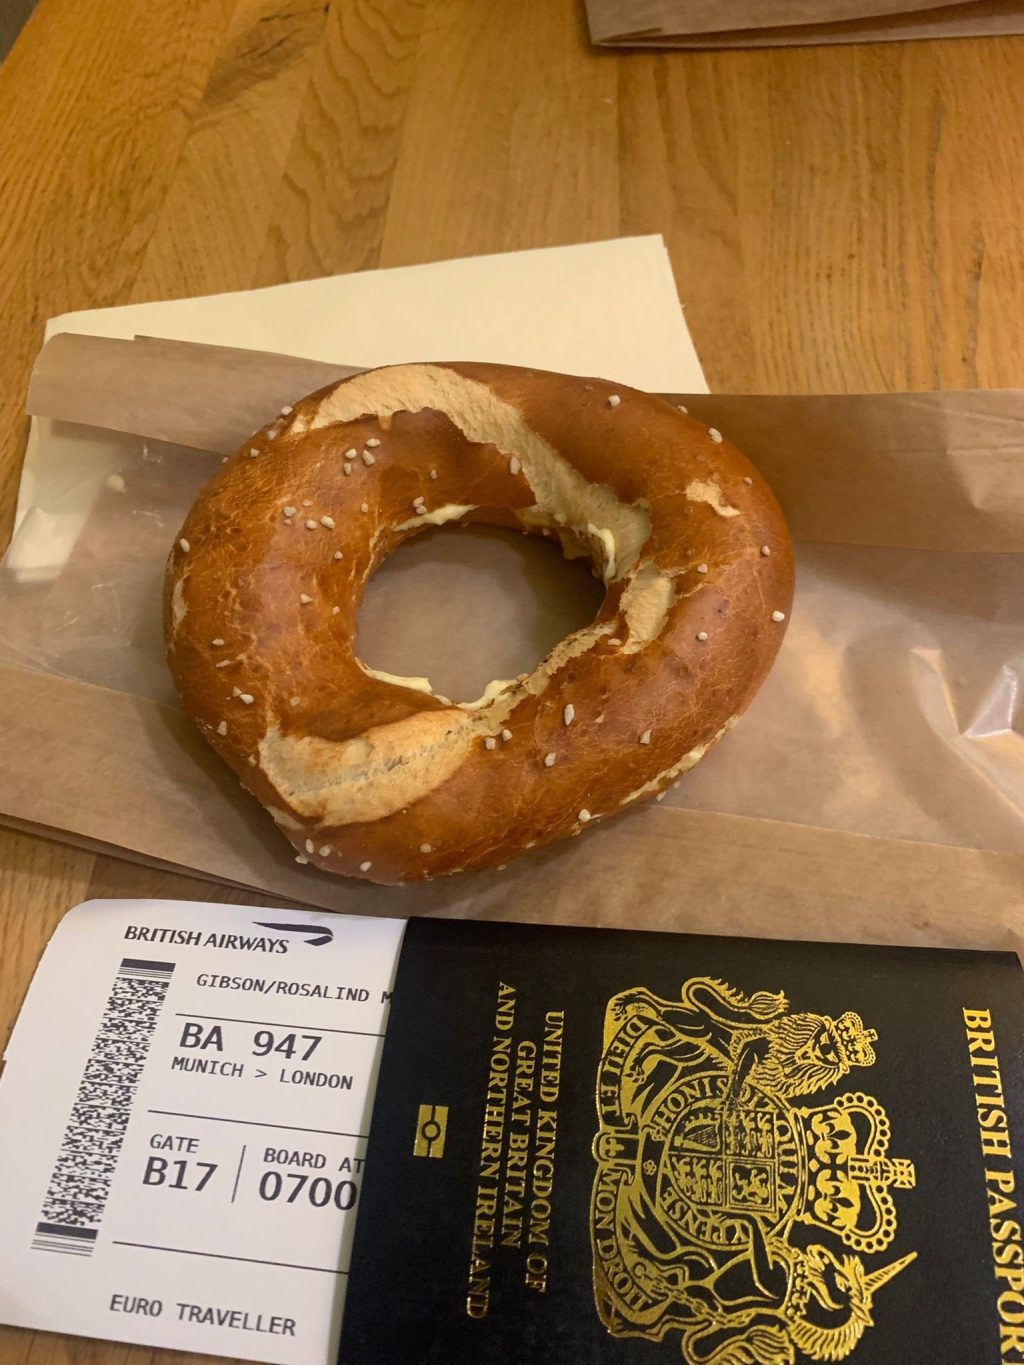 Photo of Rosie Gibson's passport, plane ticket and a bagel.